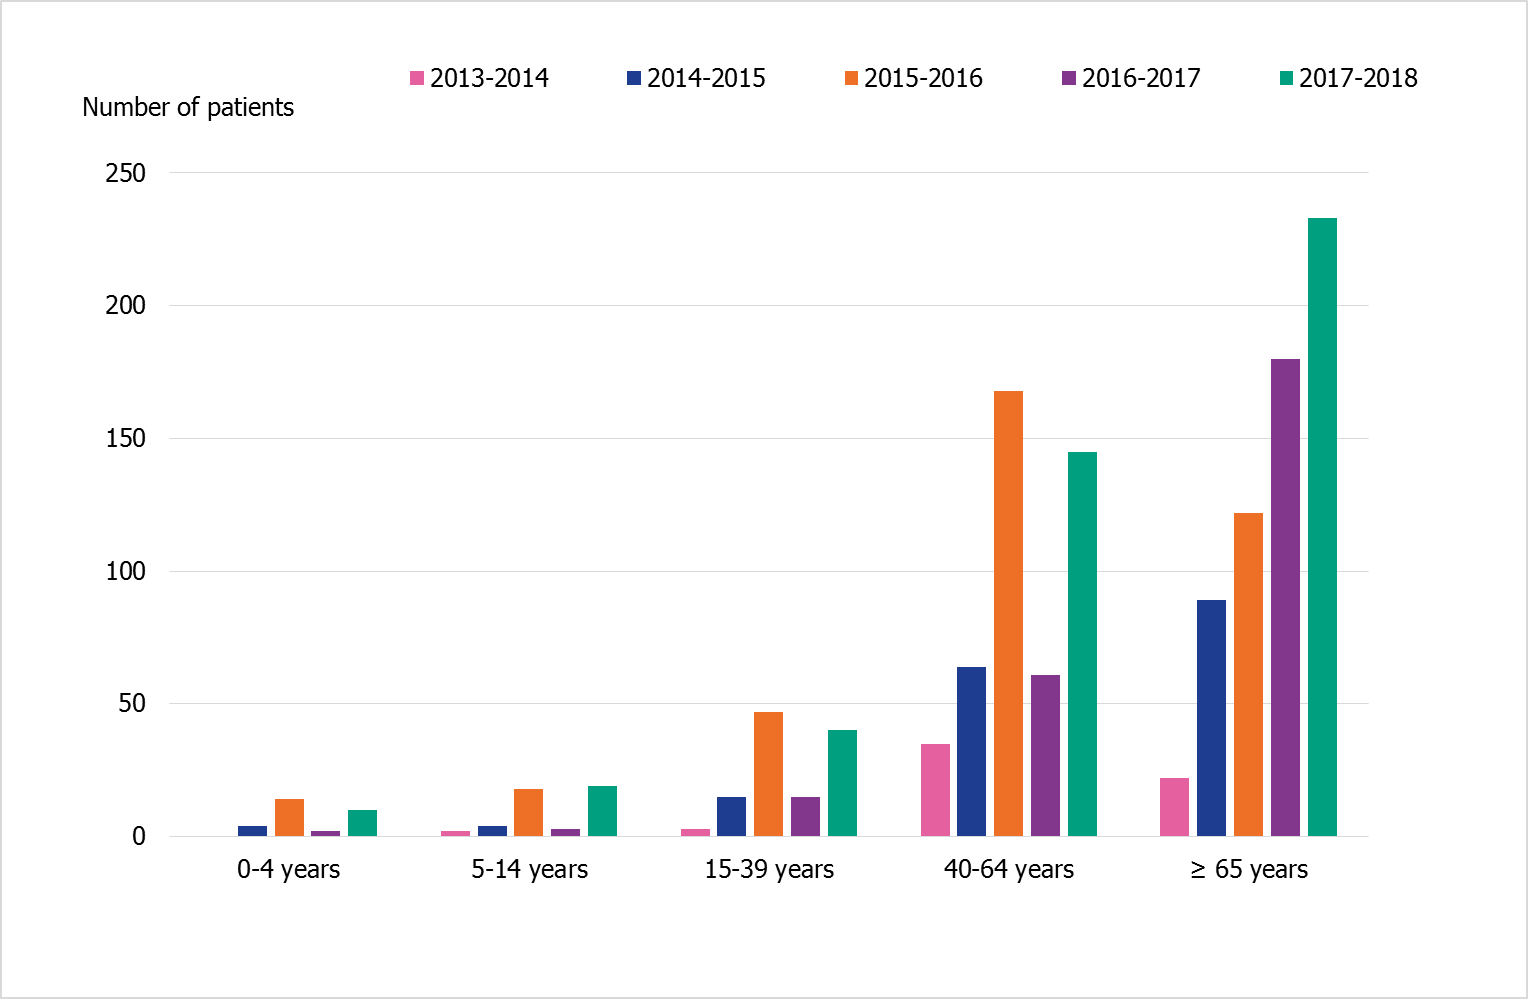 Age distribution of patients in intensive care with influenza during five seasons, in age groups 0-4 years, 5-14 years, 15-39 years, 40-64 years, and 65+. 2015-2016 and 2017-2018 stick out with higher bars for those 40-64 compared with other seasons. 